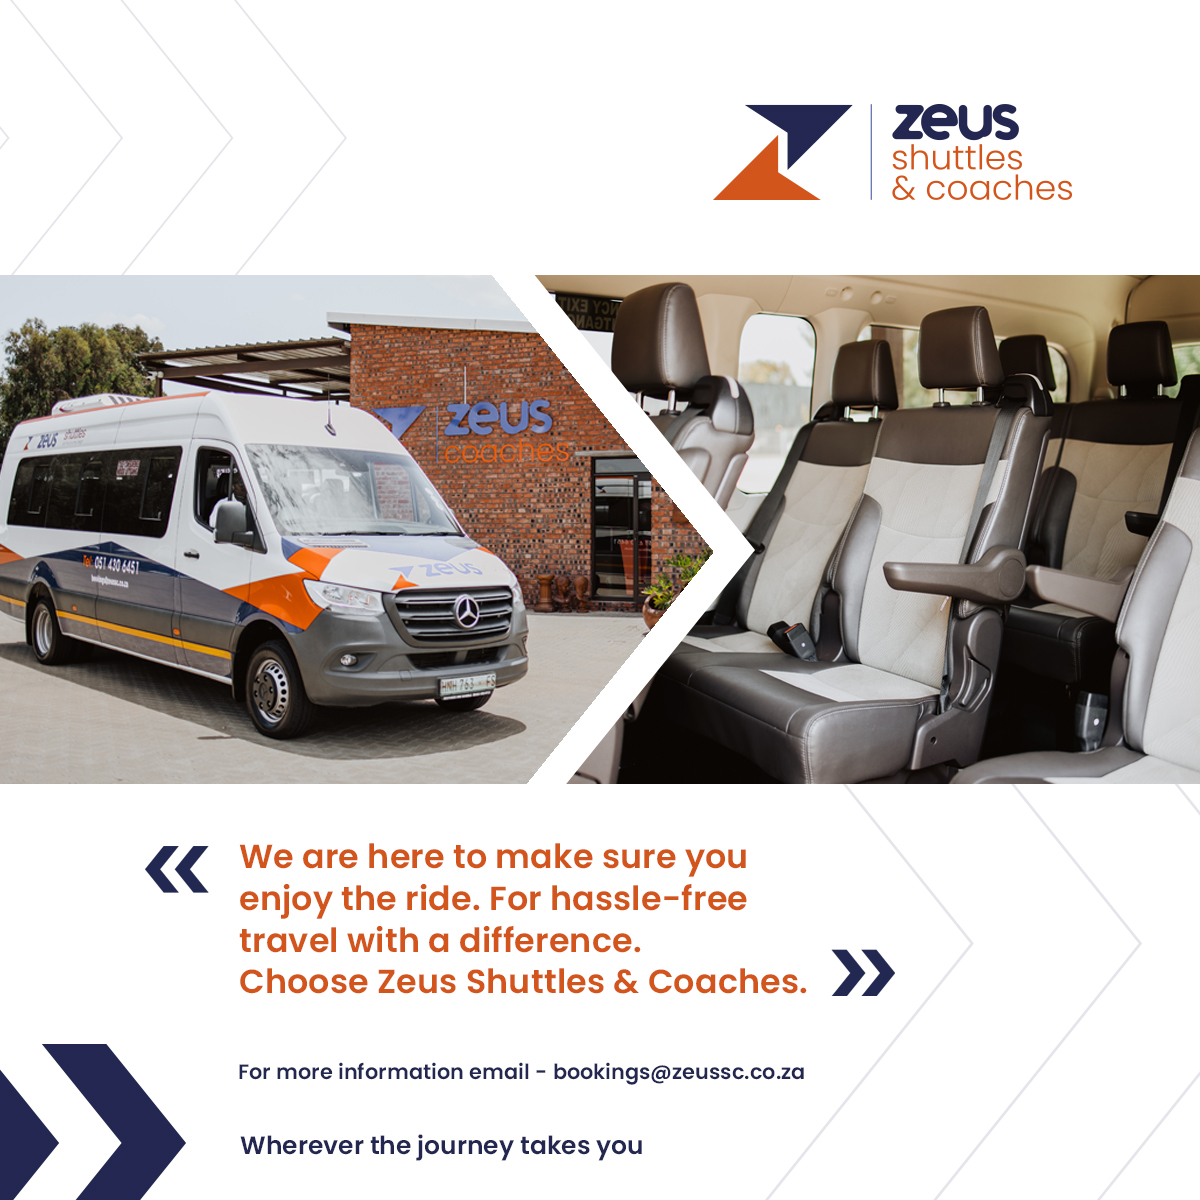 For bookings and enquiries email Bookings@zeussc.co.za 

#transportation #shuttleservice #shuttlebus #travelcoach #traveling  #longdistancetravel